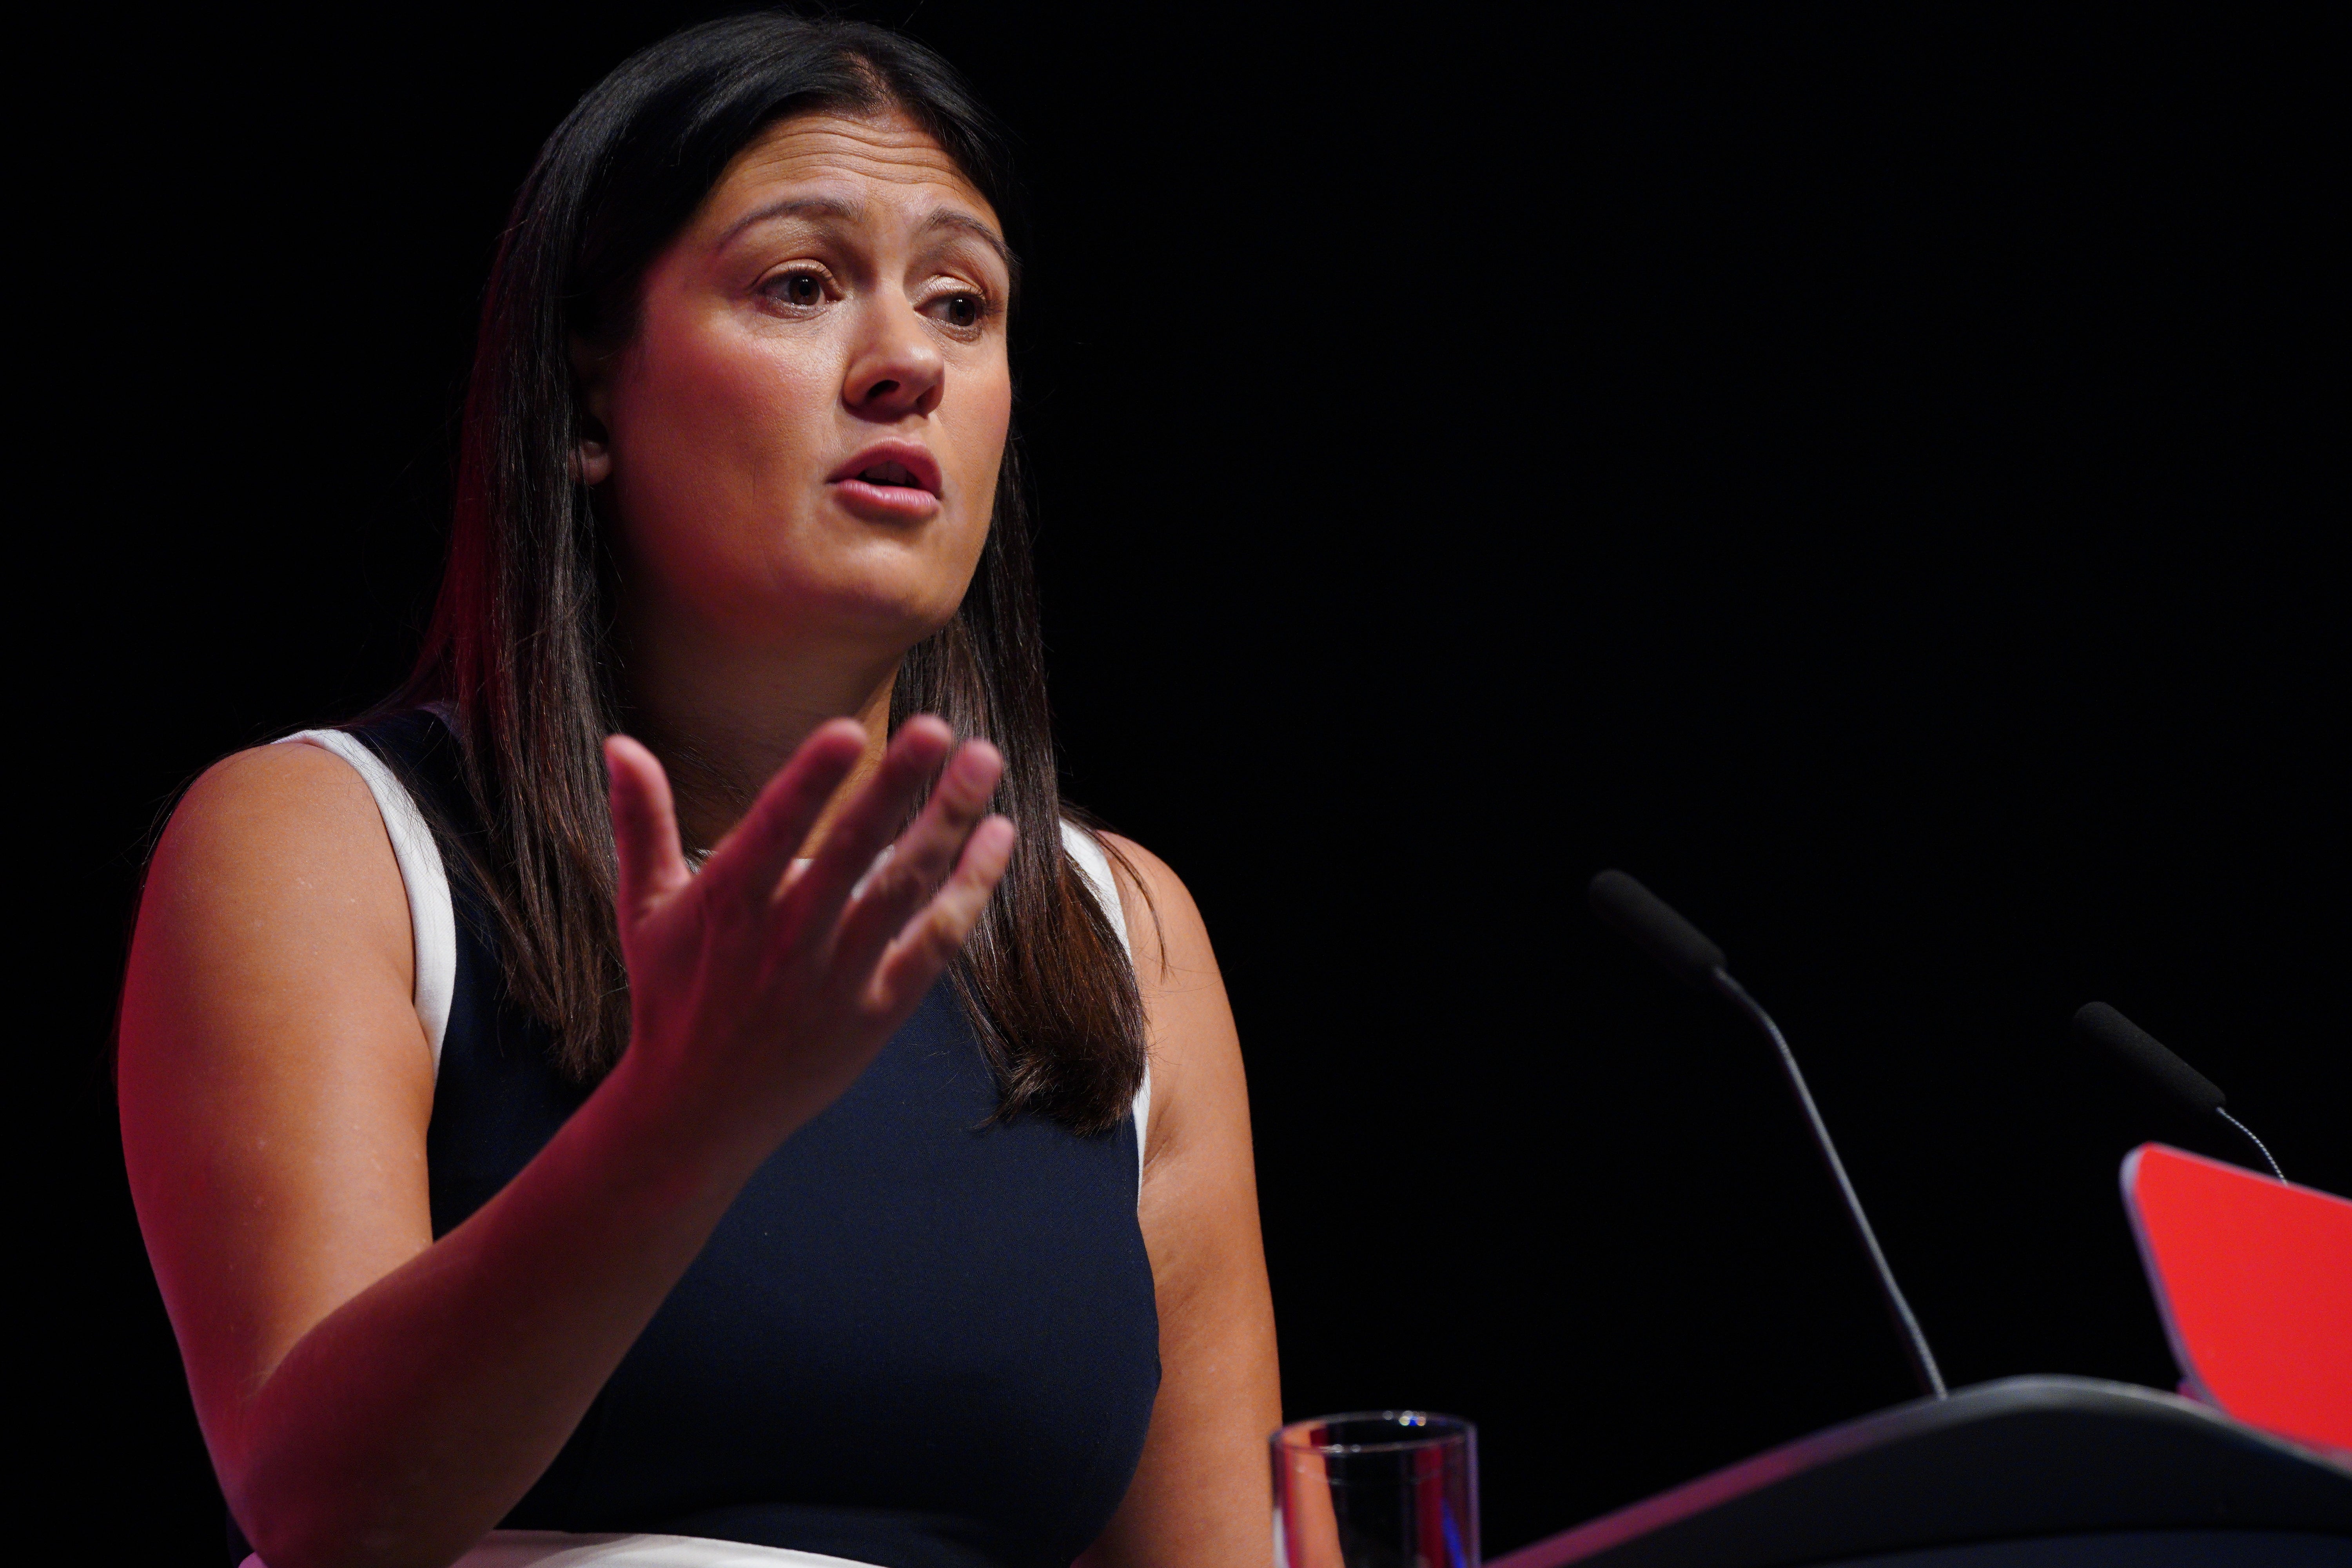 Shadow communities secretary Lisa Nandy was speaking at a fringe event at the Labour Party conference in Liverpool (Peter Byrne/PA)